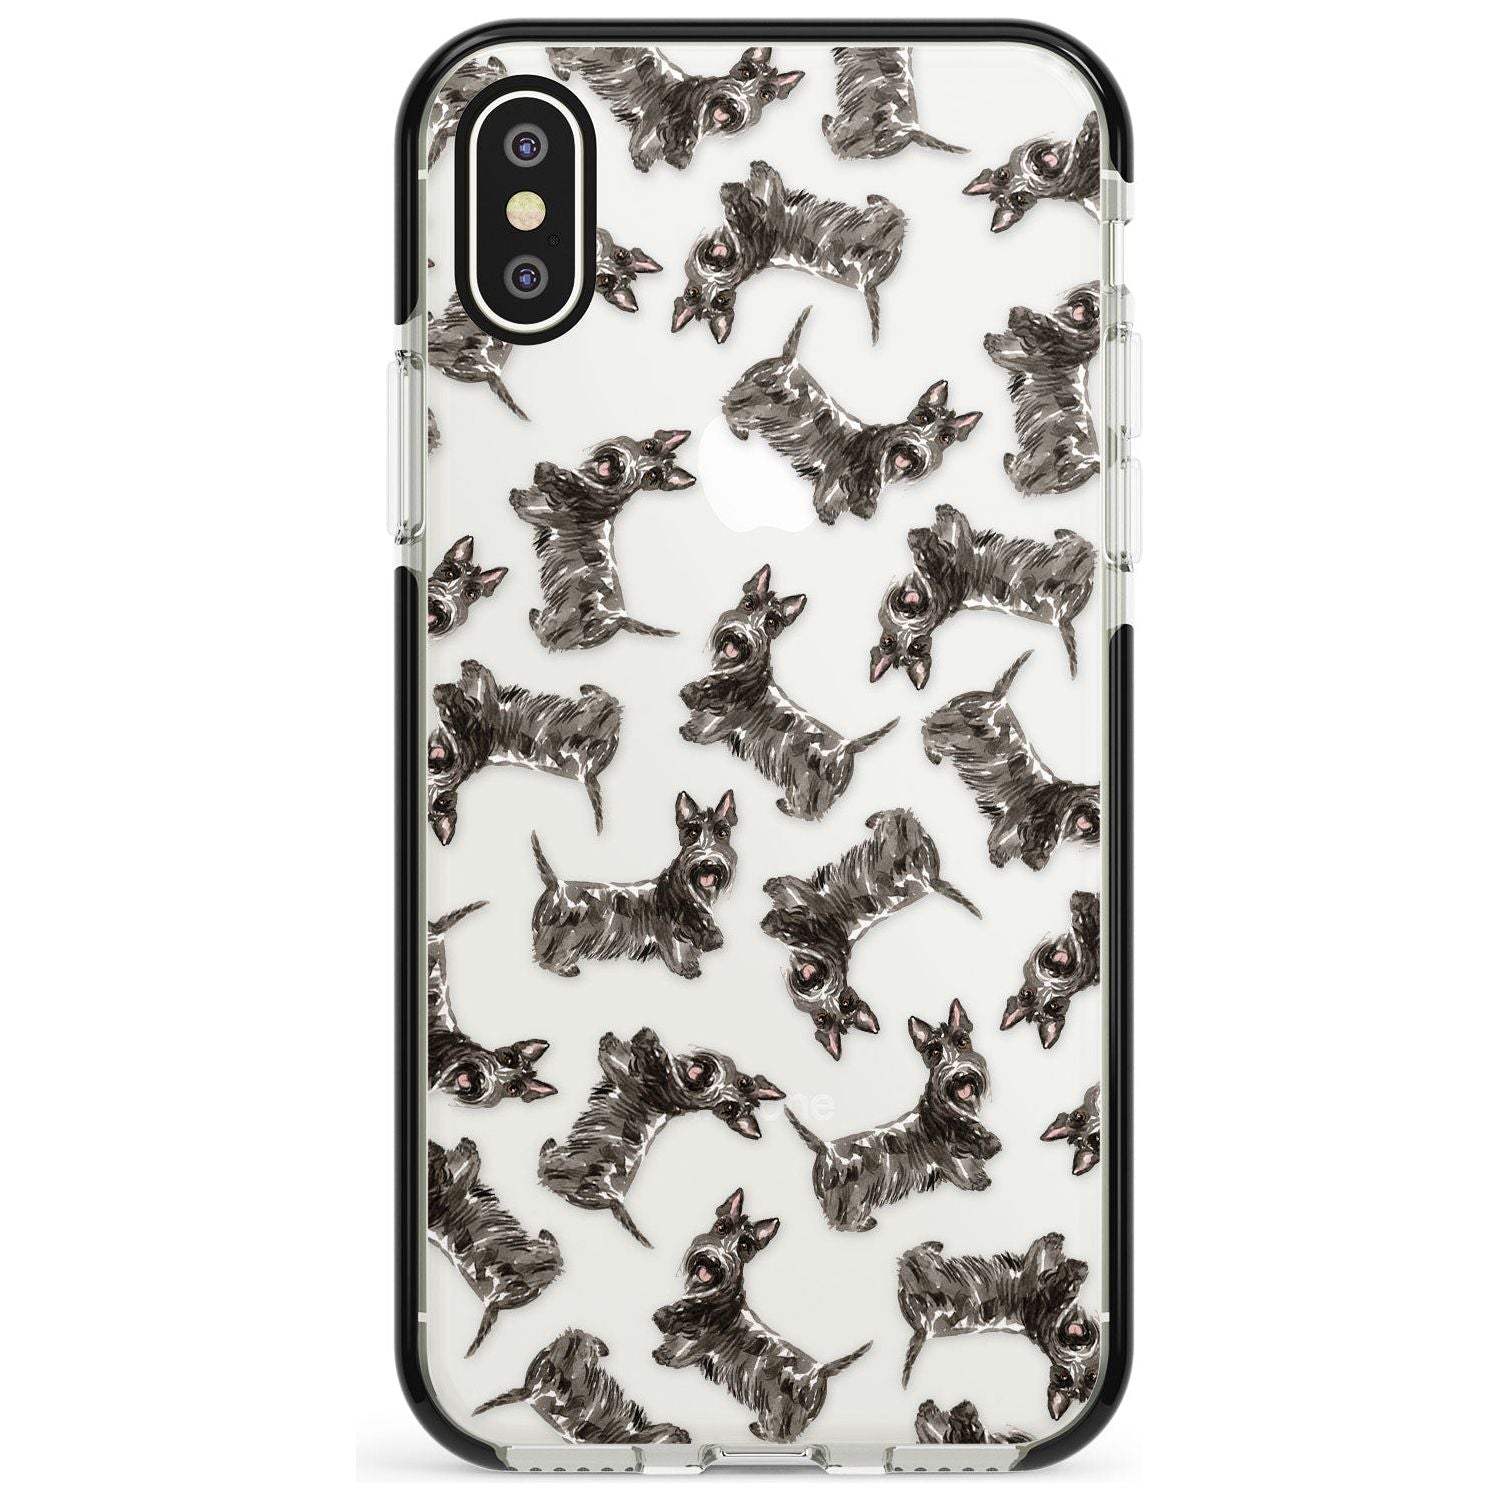 Scottish Terrier Watercolour Dog Pattern Black Impact Phone Case for iPhone X XS Max XR